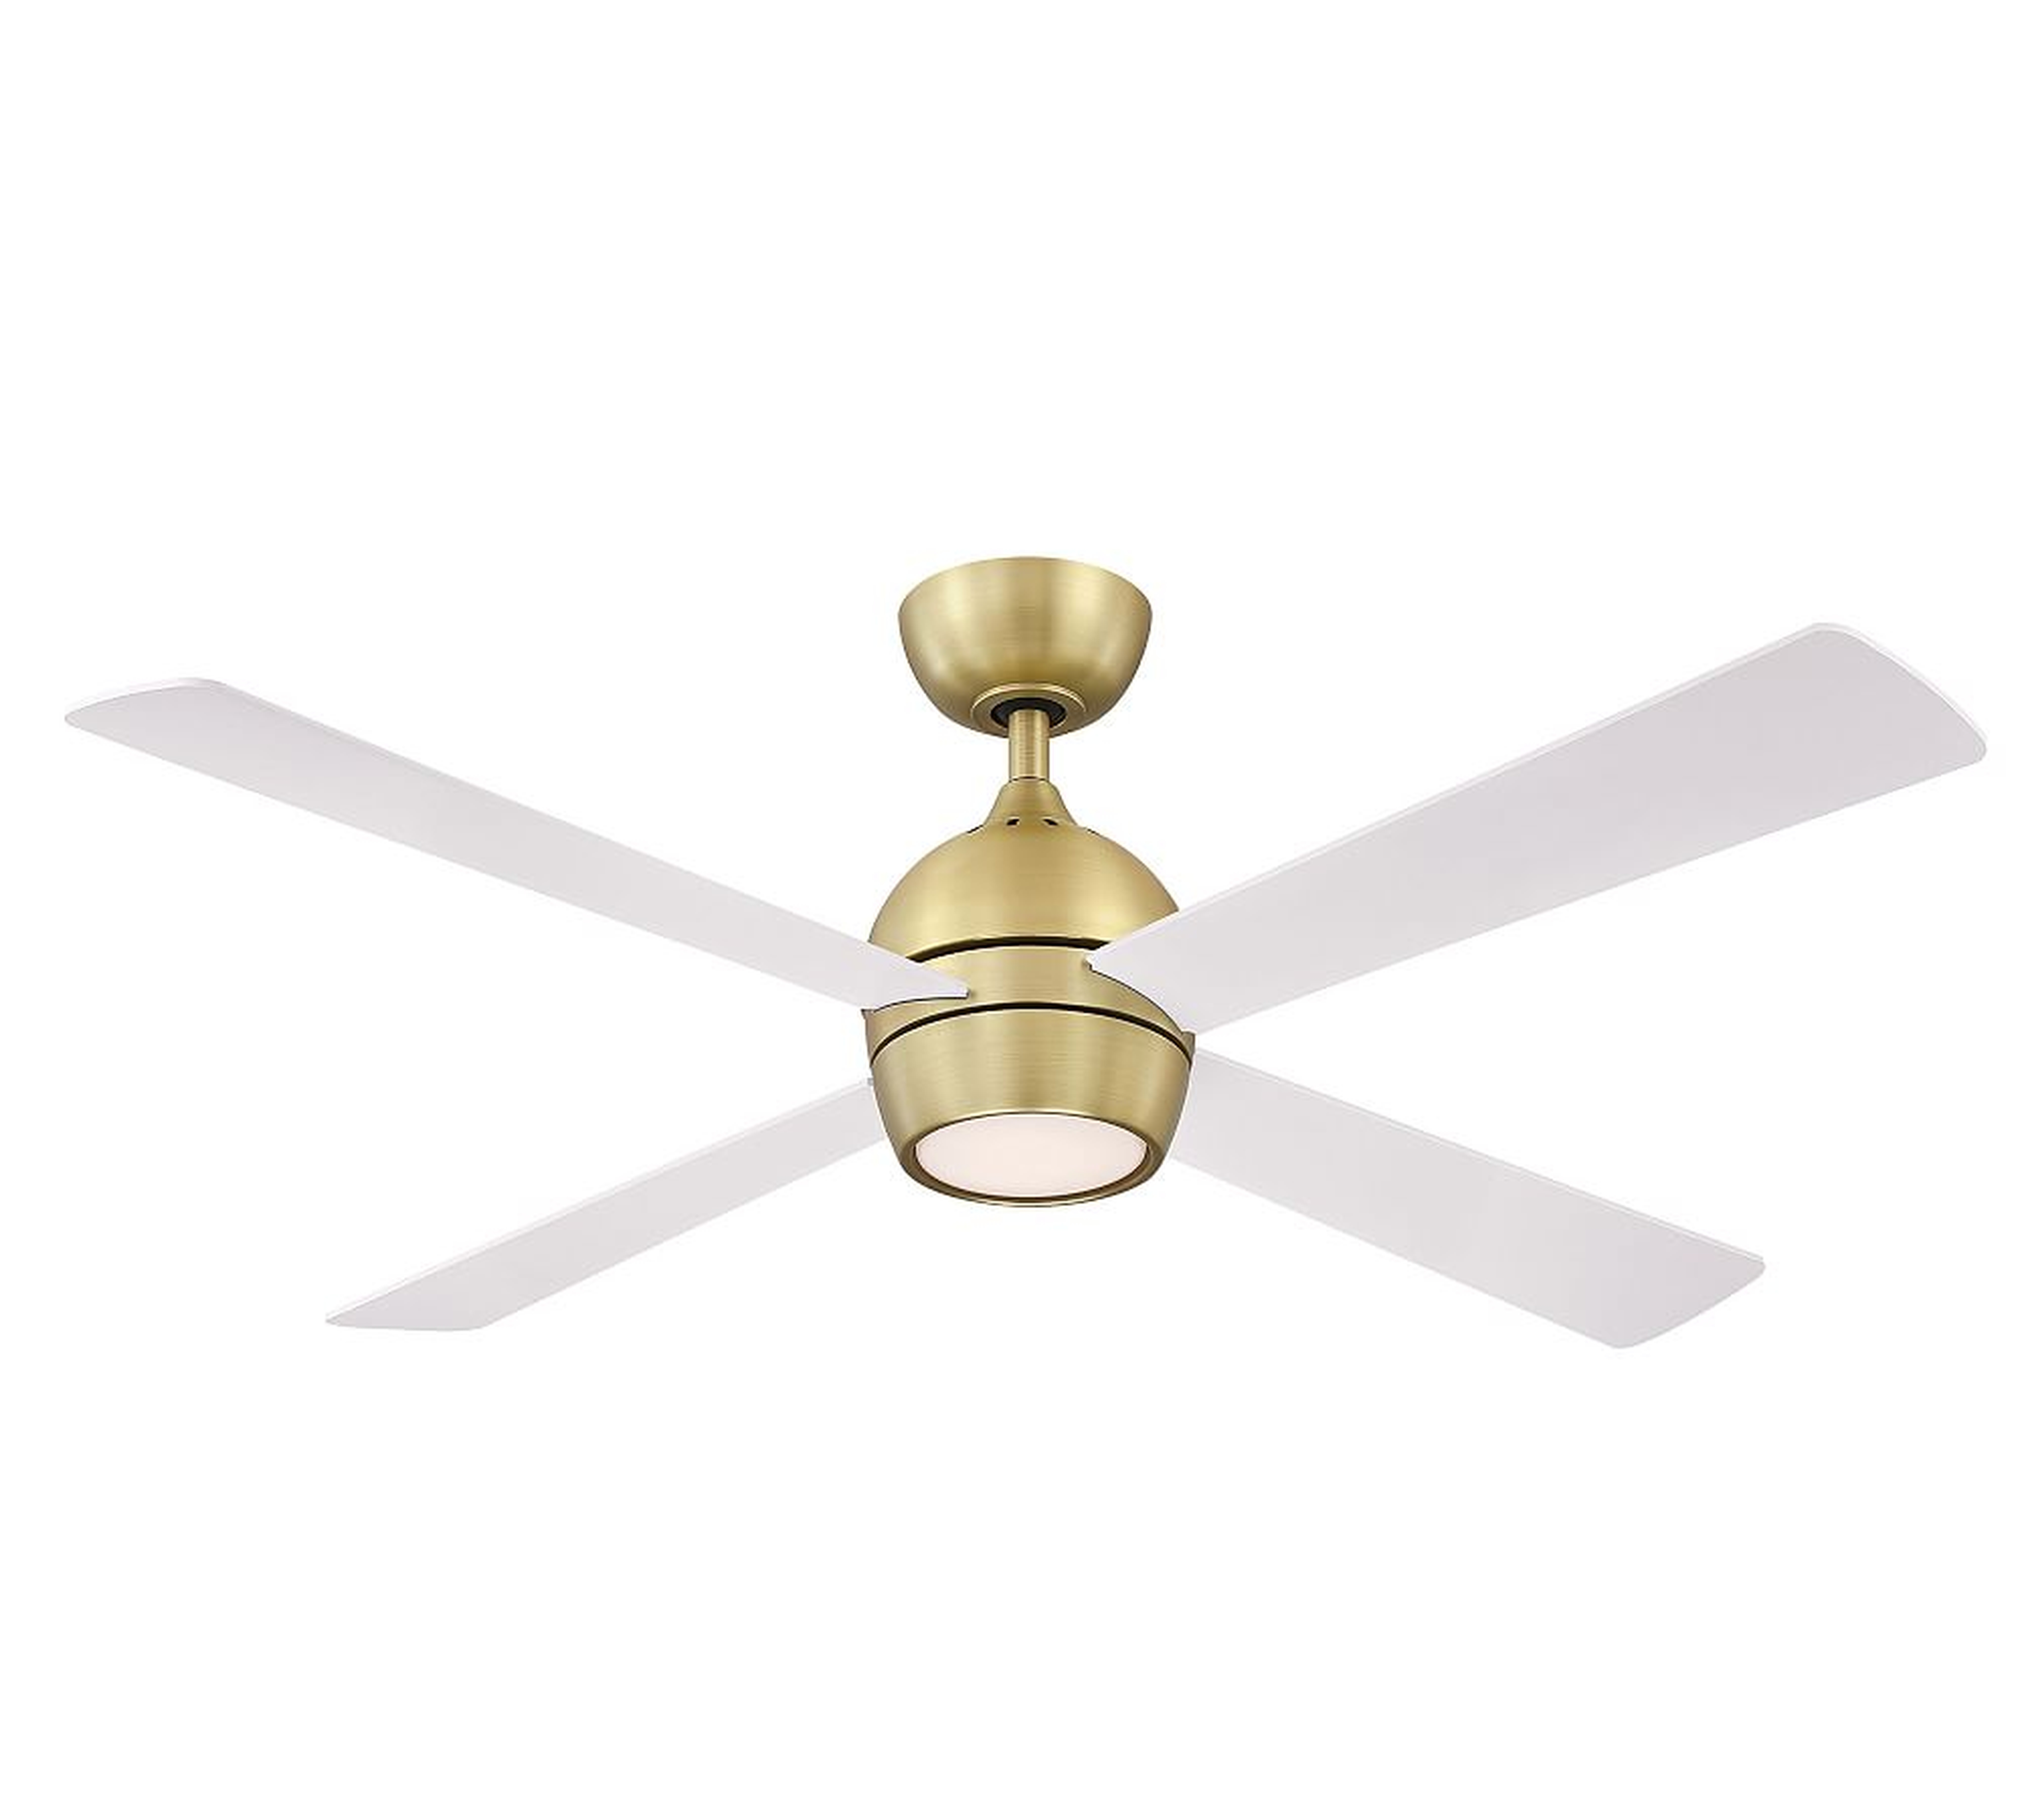 52" Kwad Ceiling Fan, Brushed Satin Brass With Matte White Blades - Pottery Barn